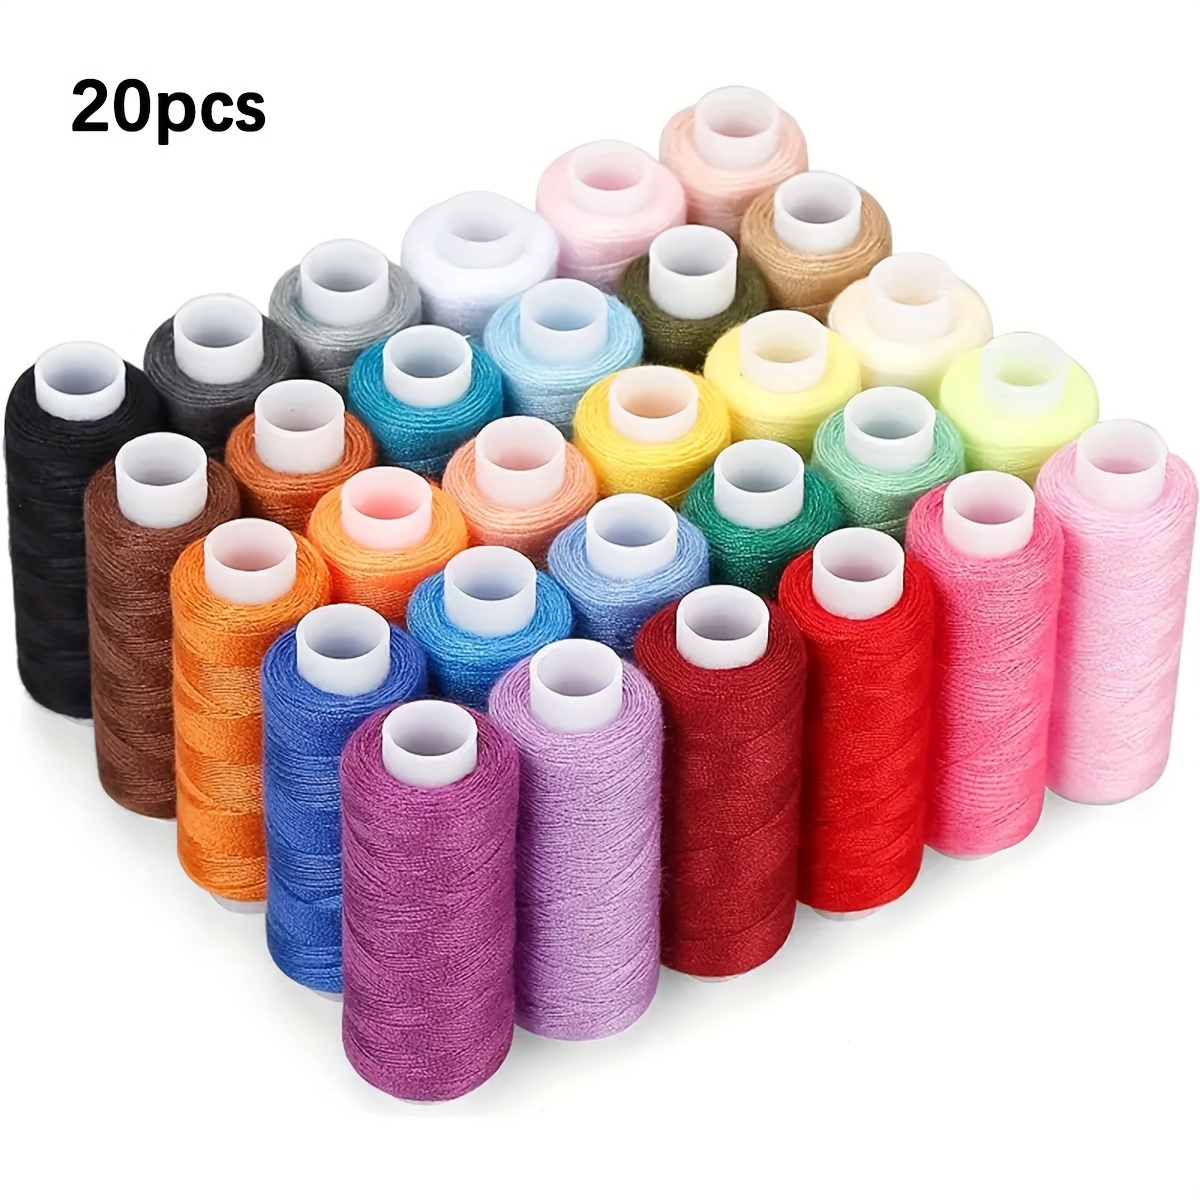 

20-piece Polyester Sewing Thread, 5000 Yards Total - Assorted Colors For Diy Crafts, Hand Stitching & Repairs On Clothes And Socks Sewing Supplies Stitch Items